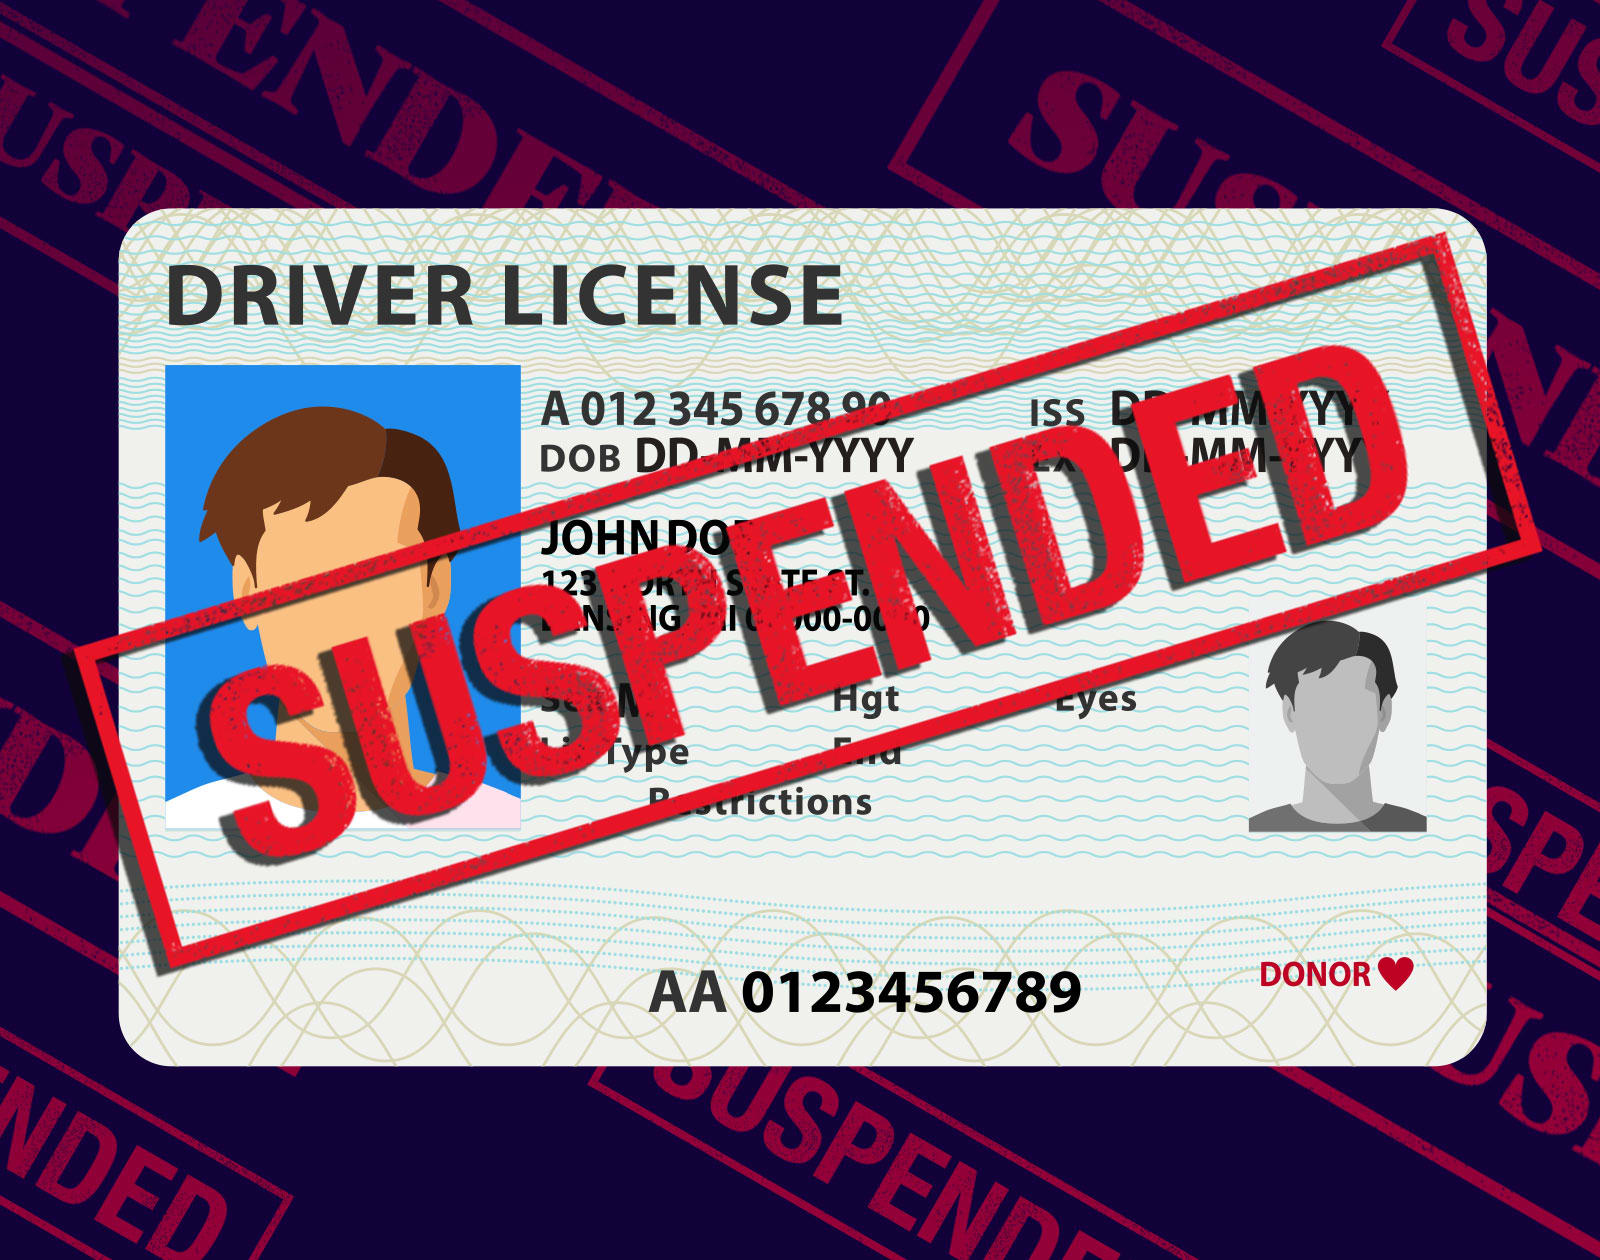 penalties for driving with suspended license